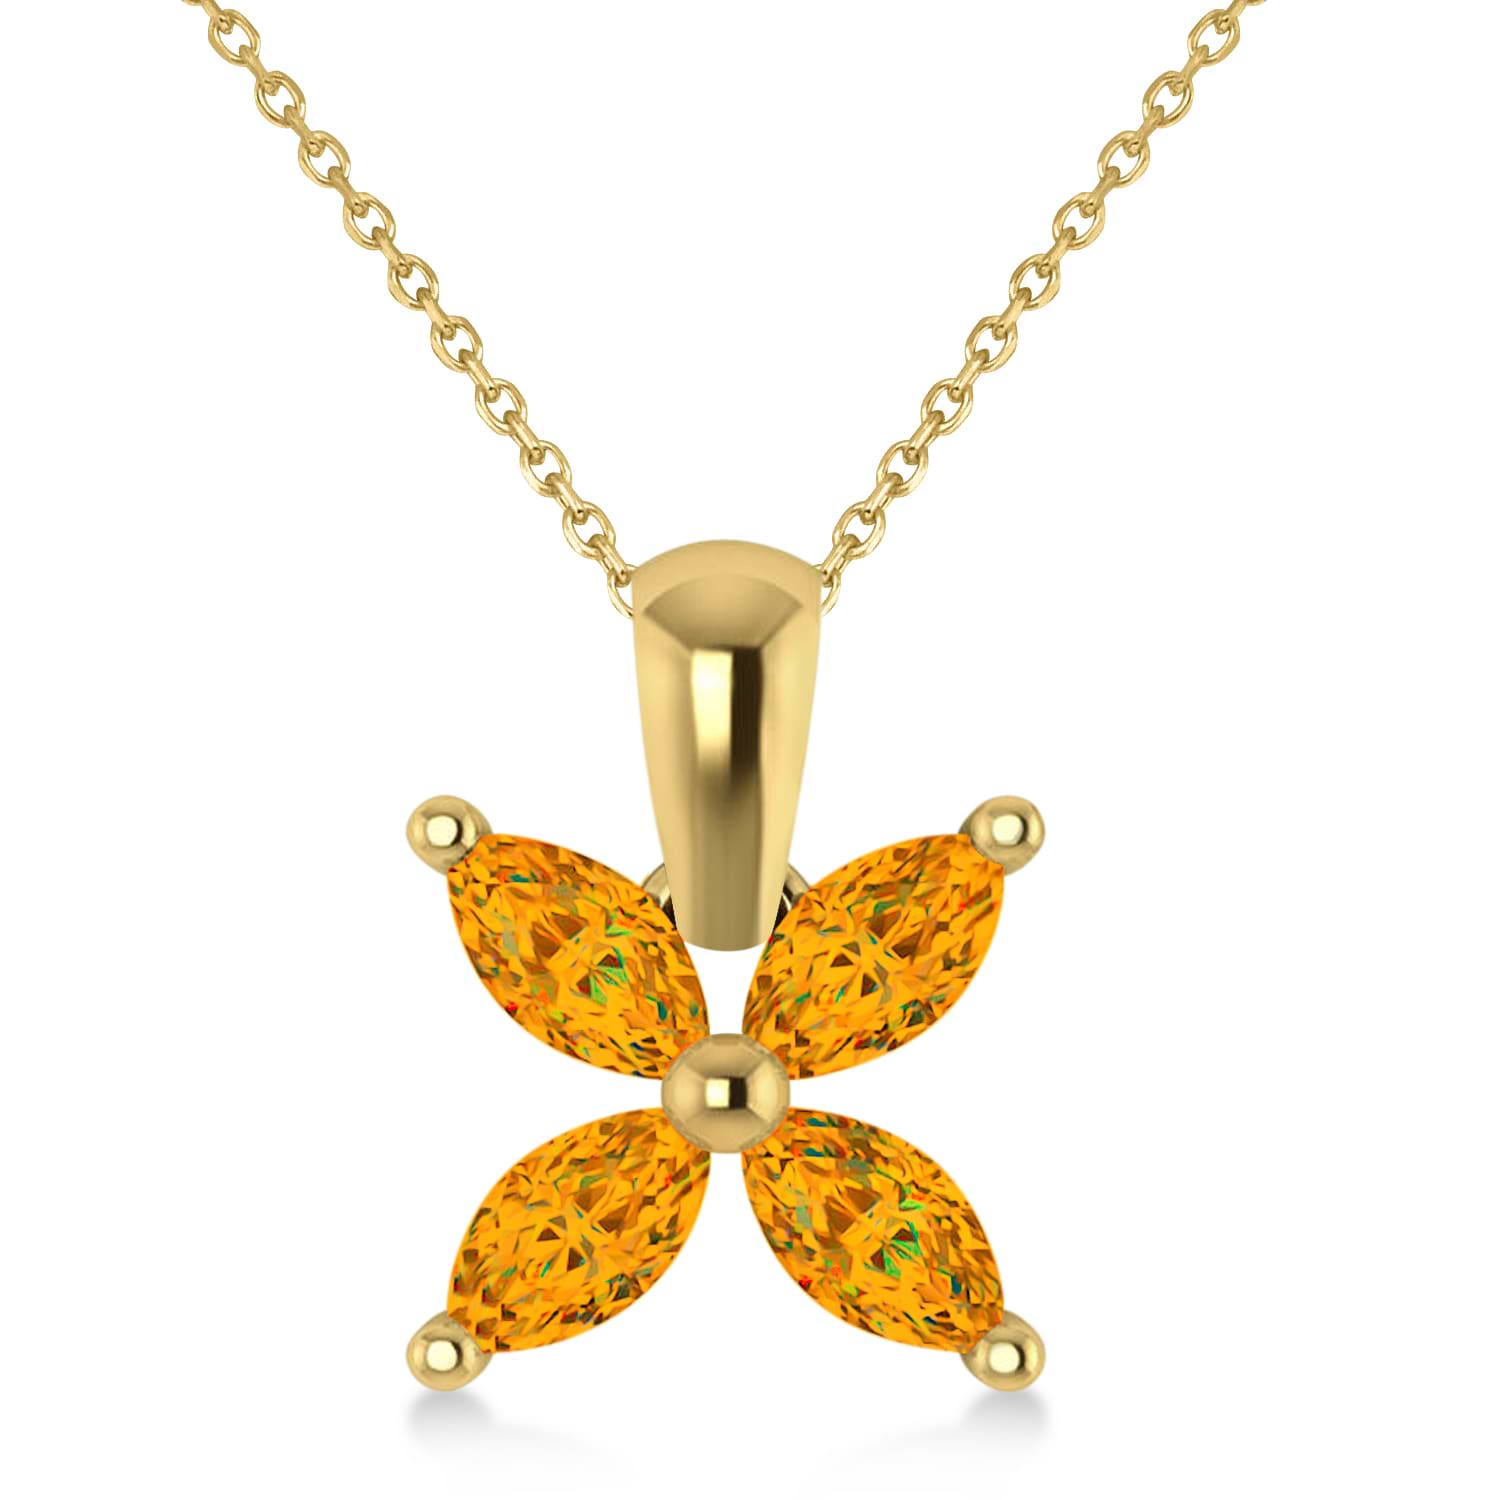 Citrine Marquise Flower Pendant Necklace 14k Yellow Gold (0.80 ctw)